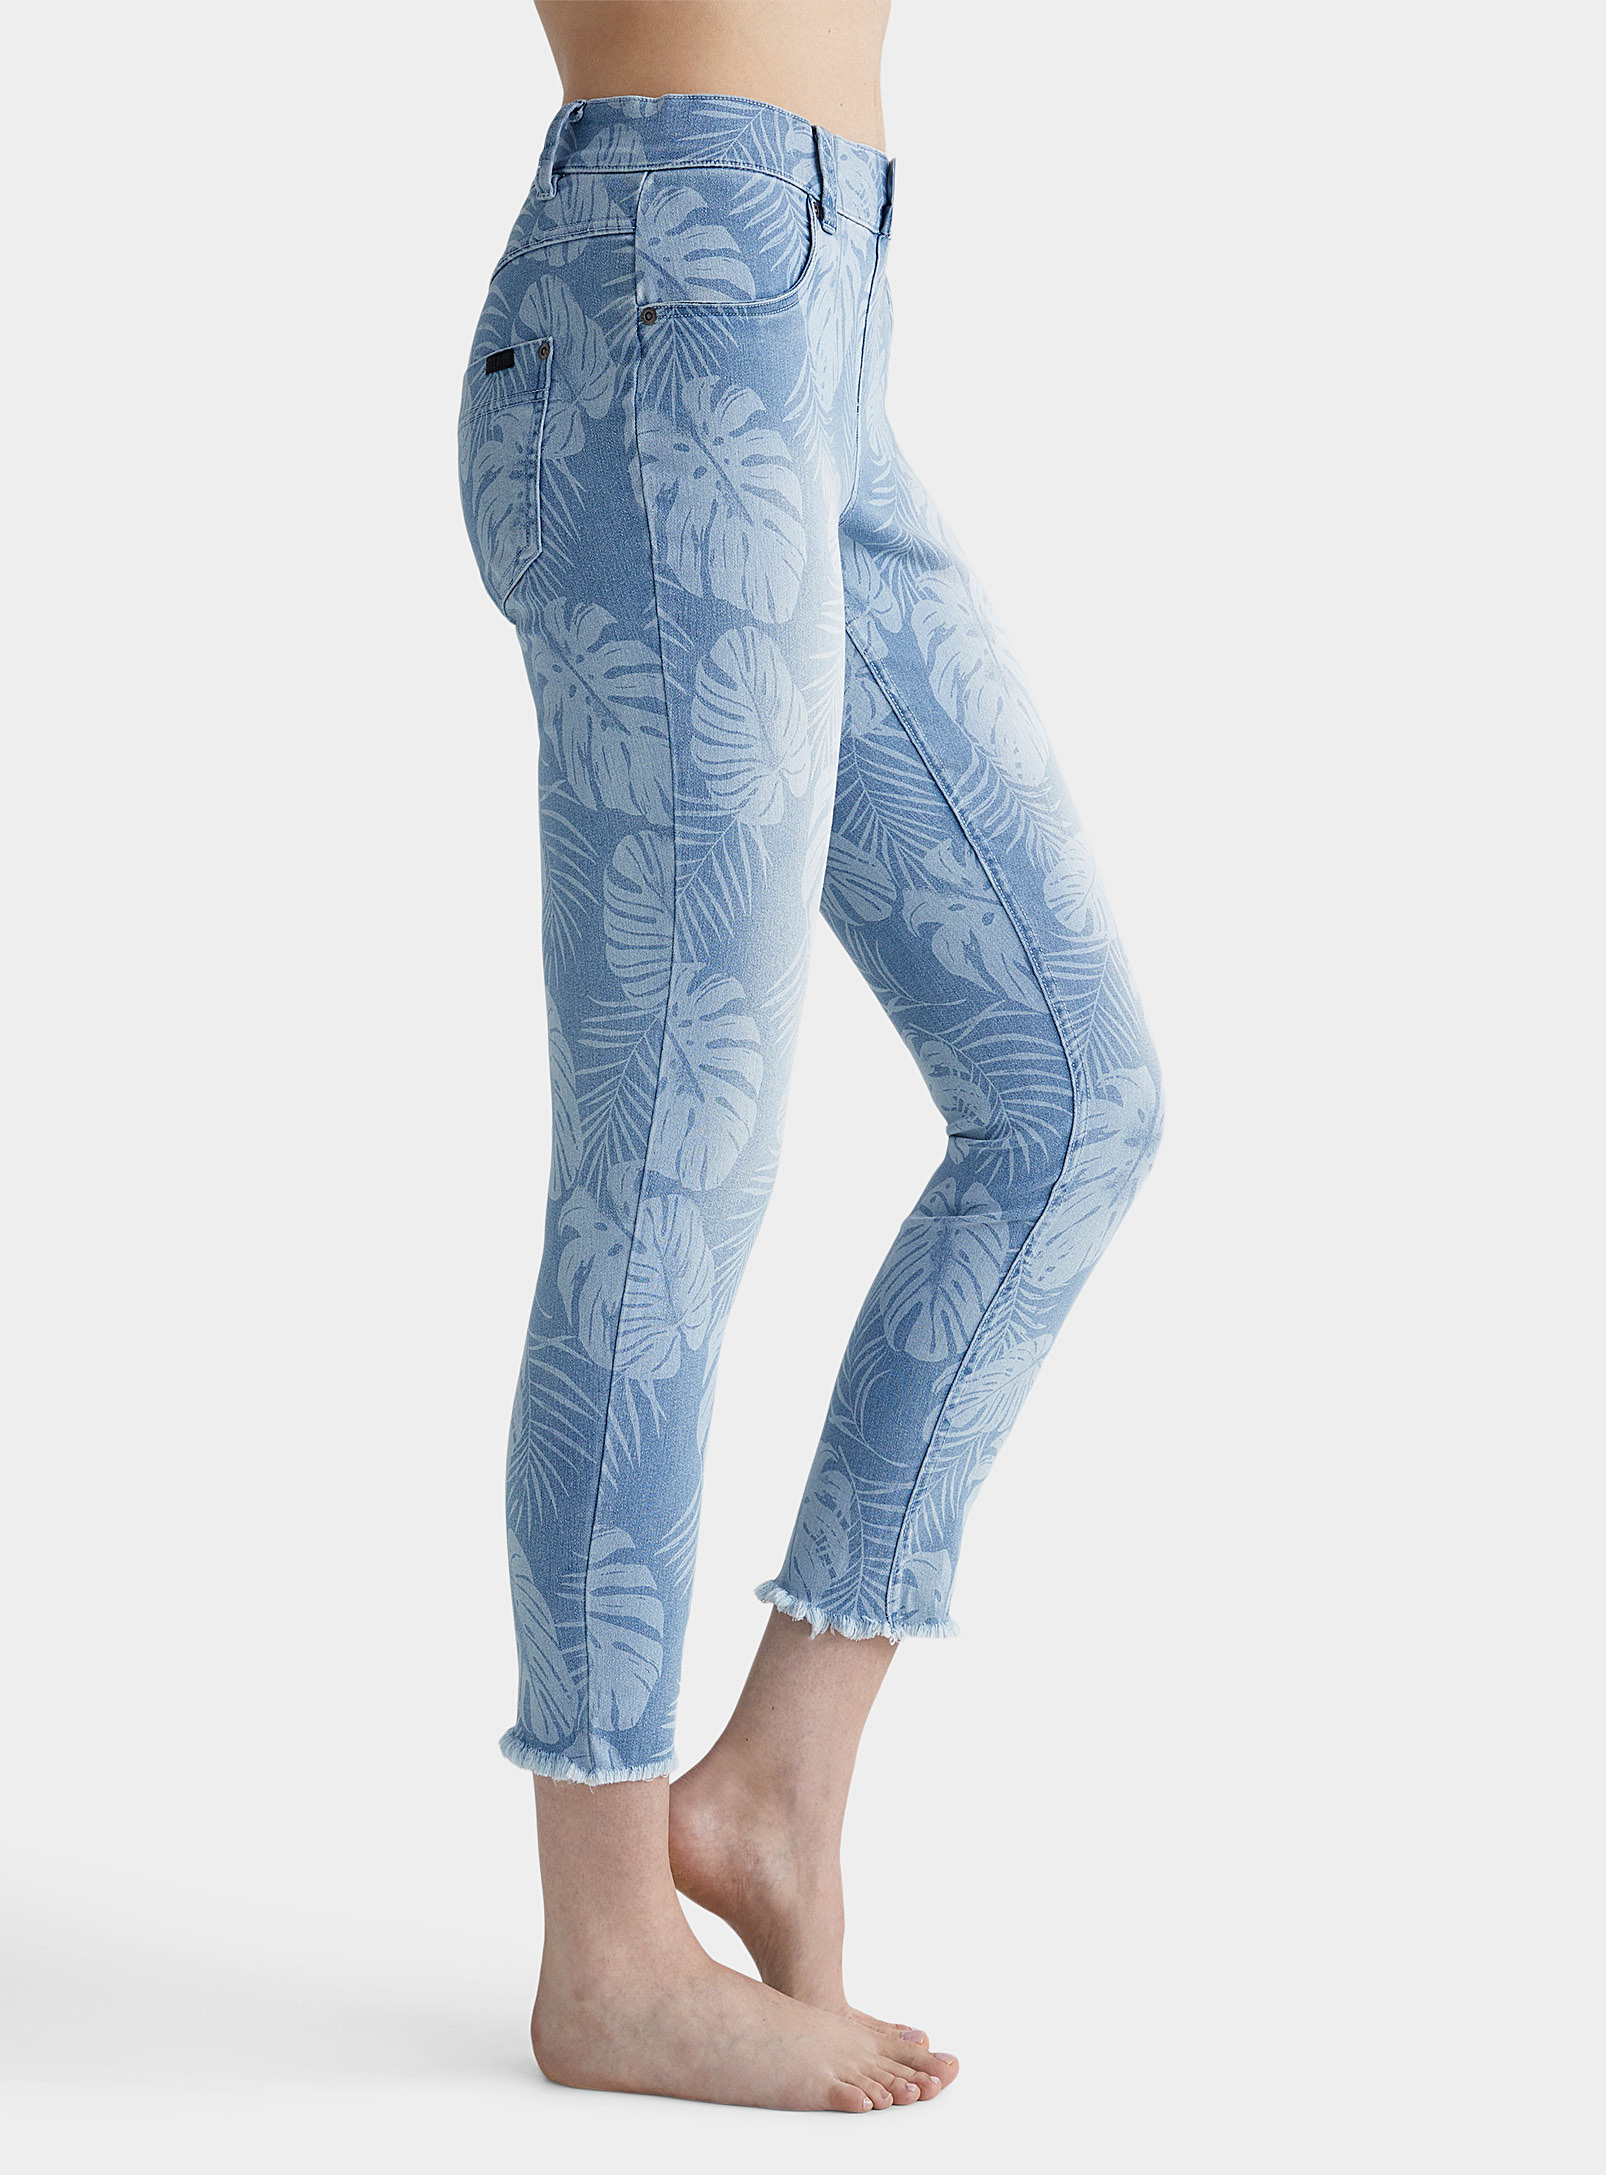 Hue Tropical Faded Fitted Jegging In Patterned Blue